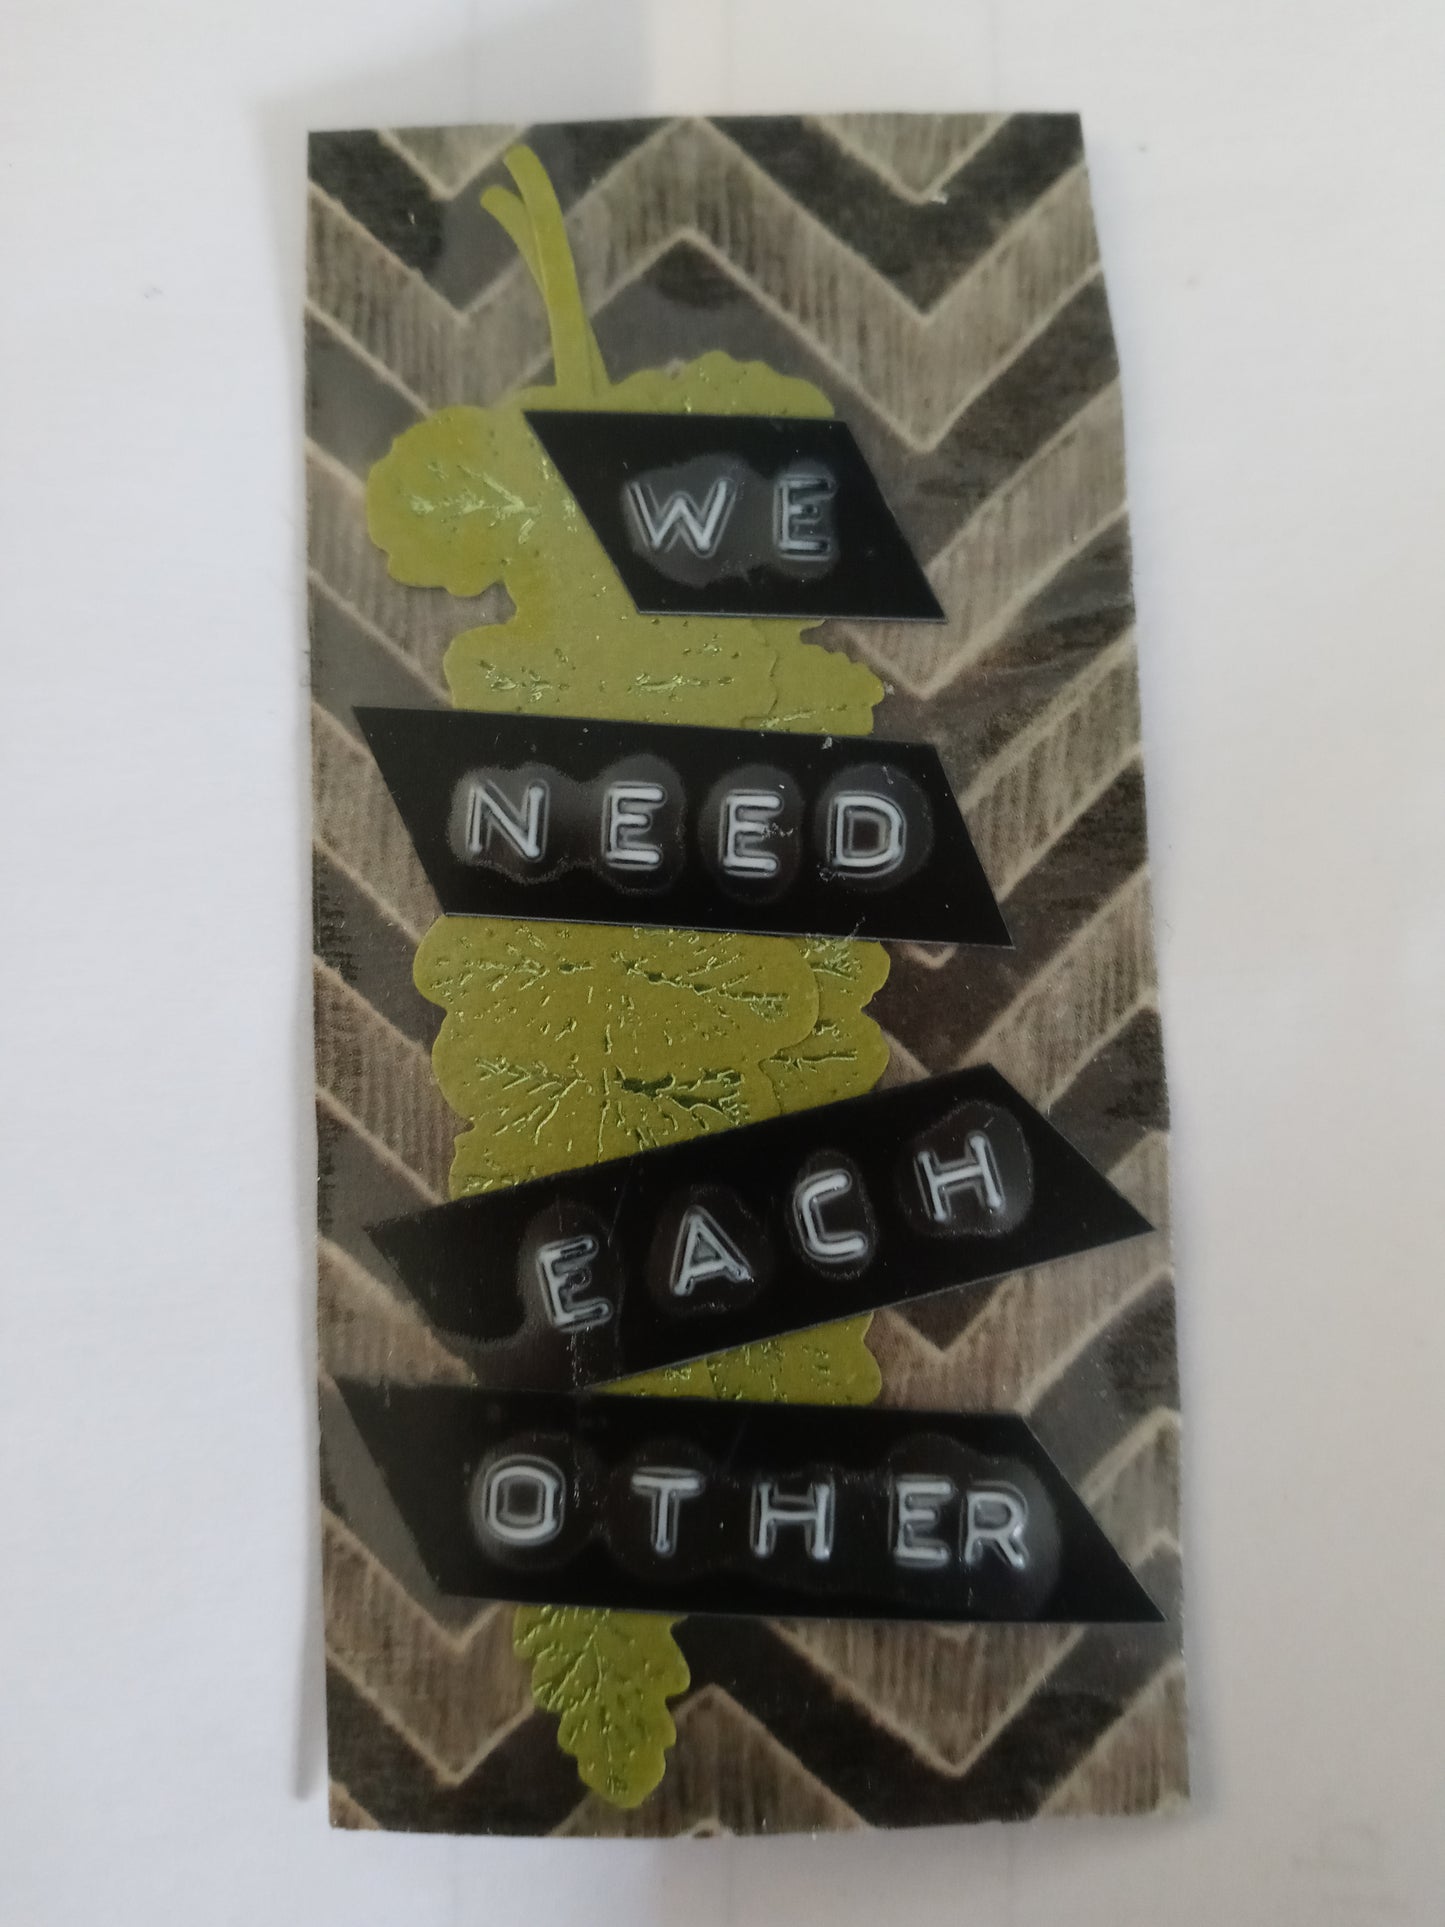 A small, long rectangular sticker with a background of black and beige zig zags, with a shiny green diecut leaf and the words "WE NEED EACH OTHER" printed from a label maker on top.